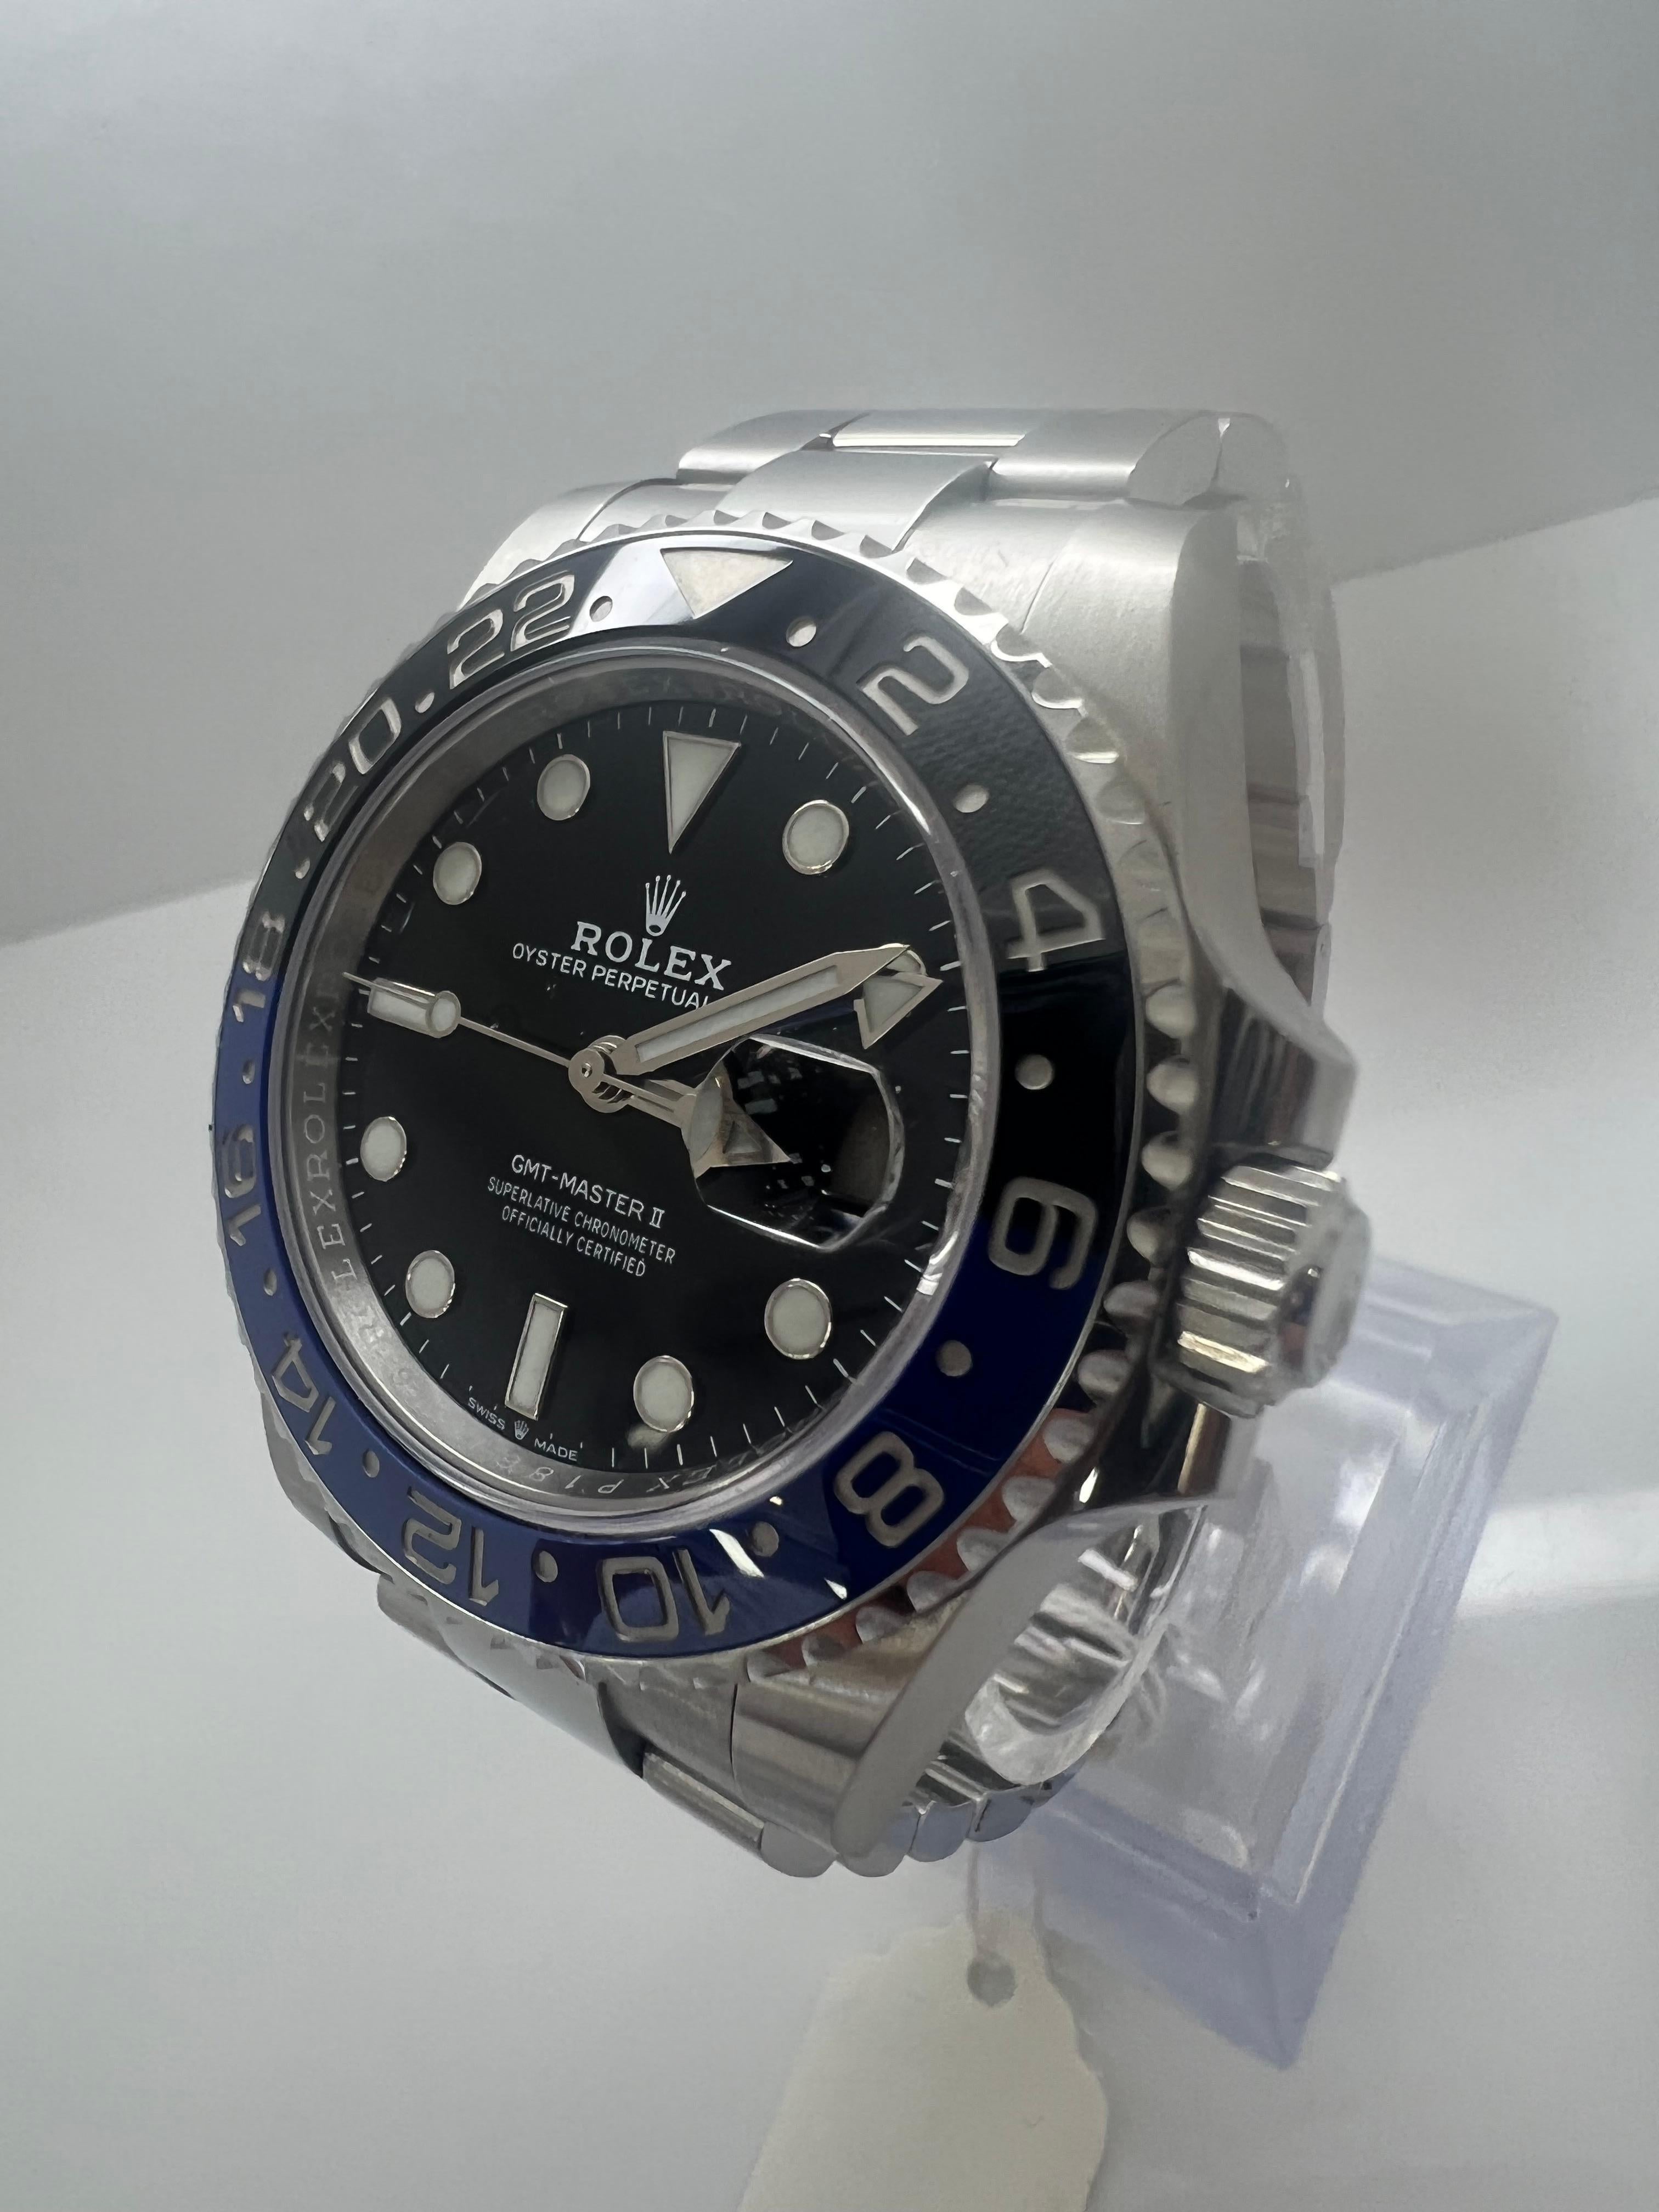 Rolex Gmt Master II 126710BLNR Batman Ceramic Men's Watch

brand new box papers

circa 2022

all original

free overnight insured shipping signature confirmation

shop with confidence
